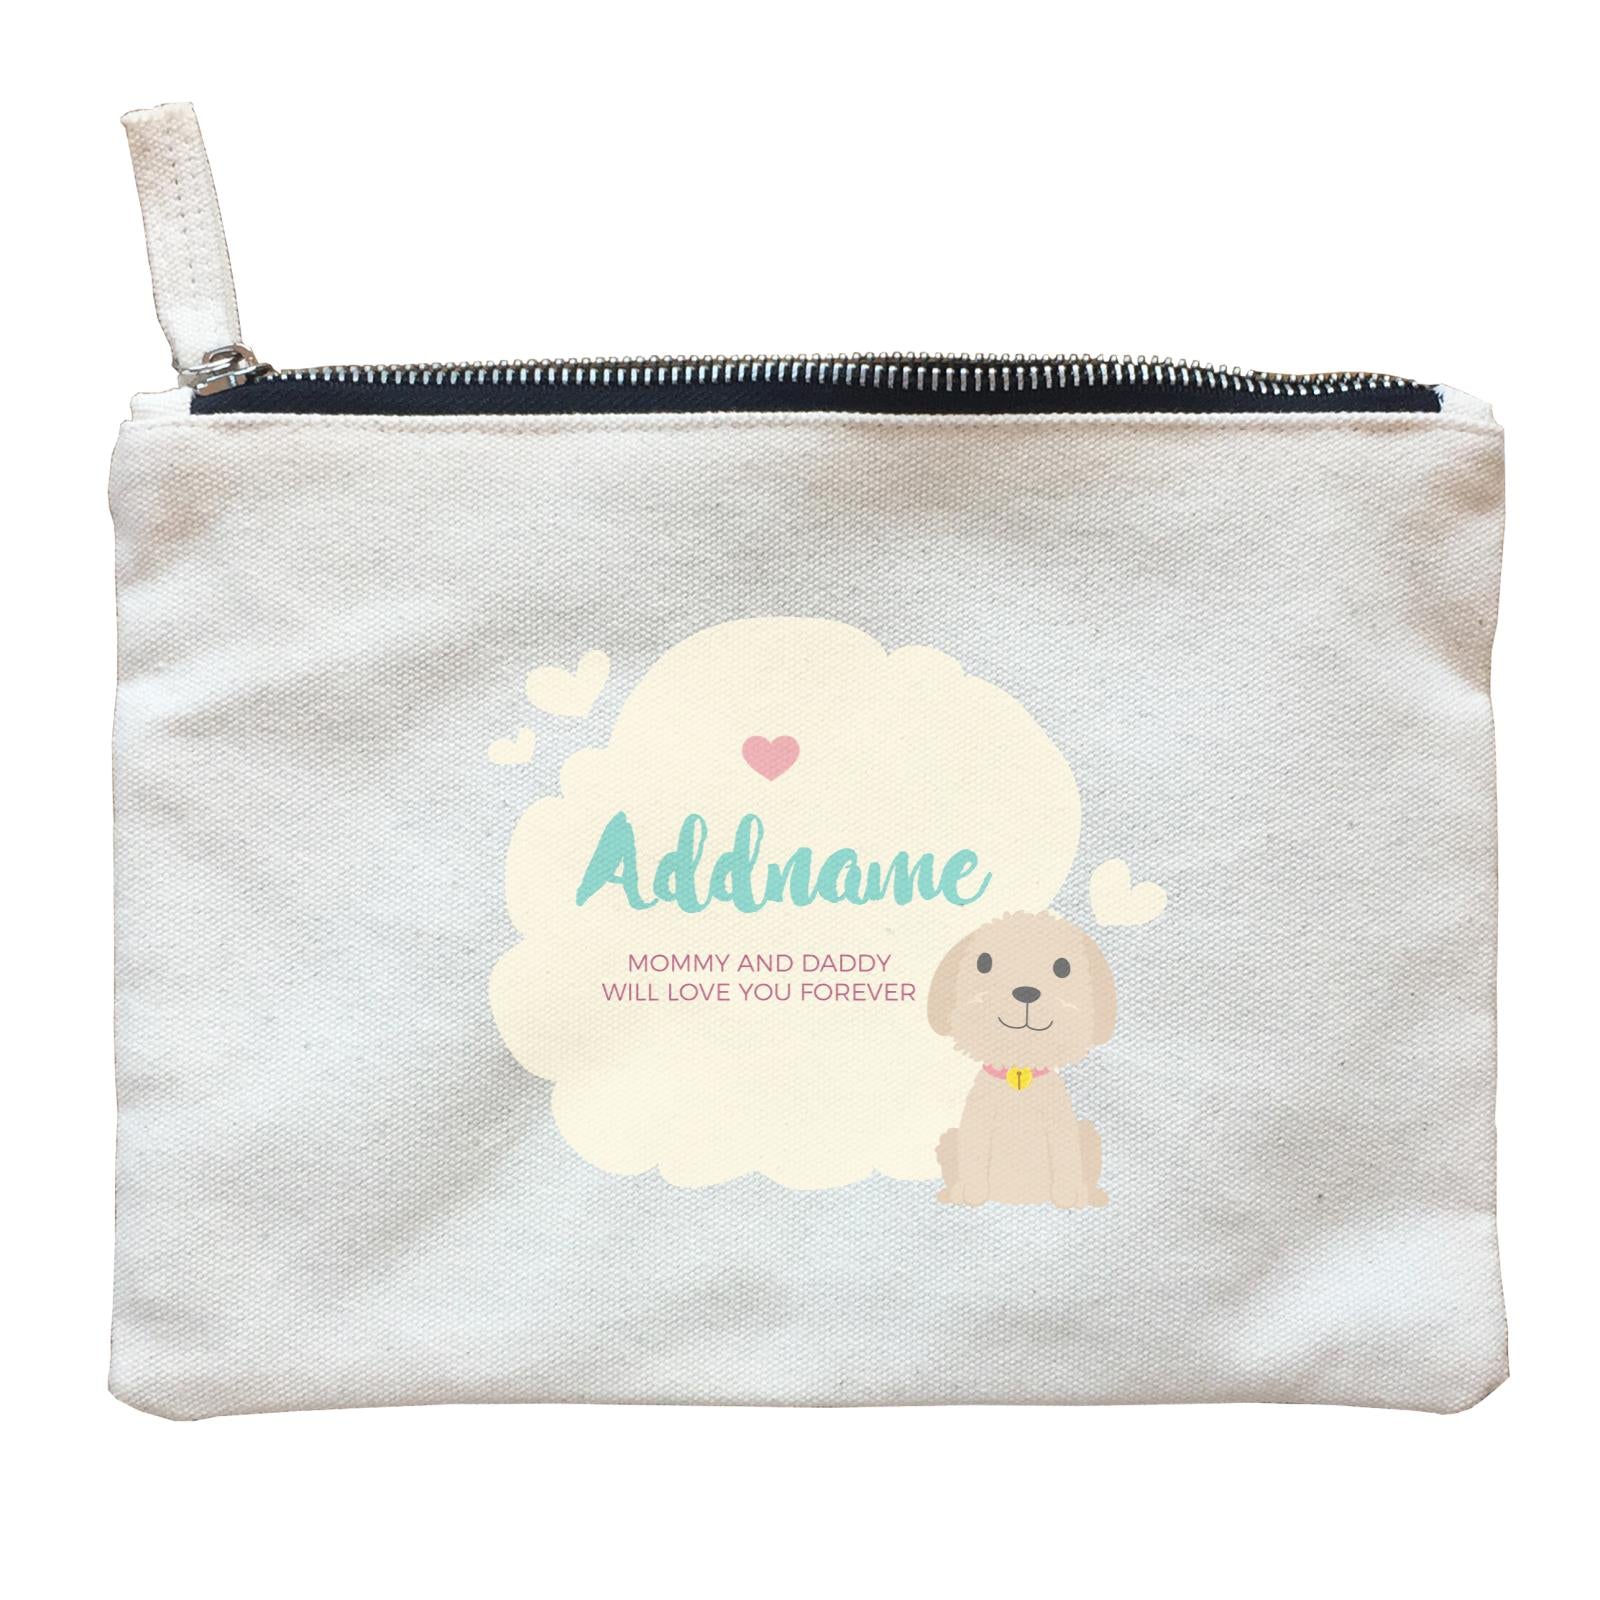 Cute Dog and Yellow Cloud Personalizable with Name and Text Zipper Pouch